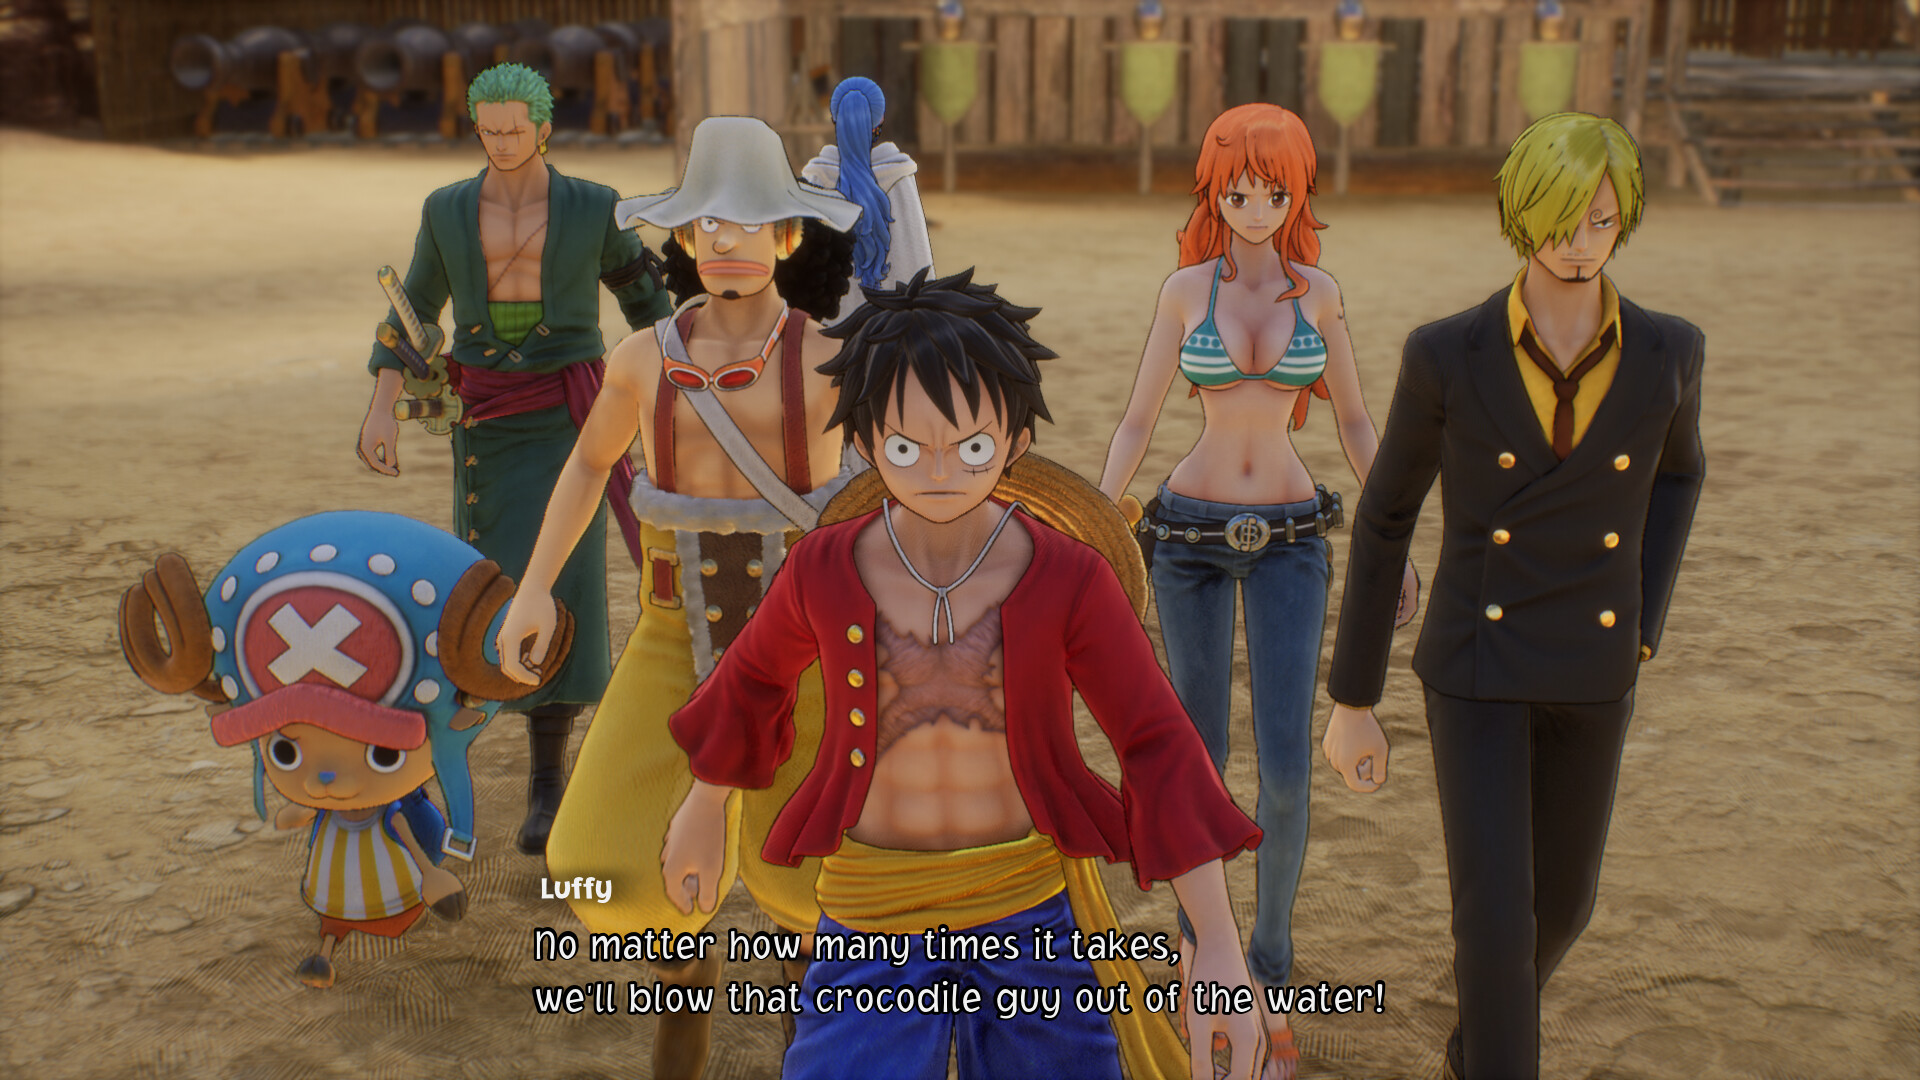 One Piece Odyssey Explains Oda's New Characters, Reveals Gameplay Footage